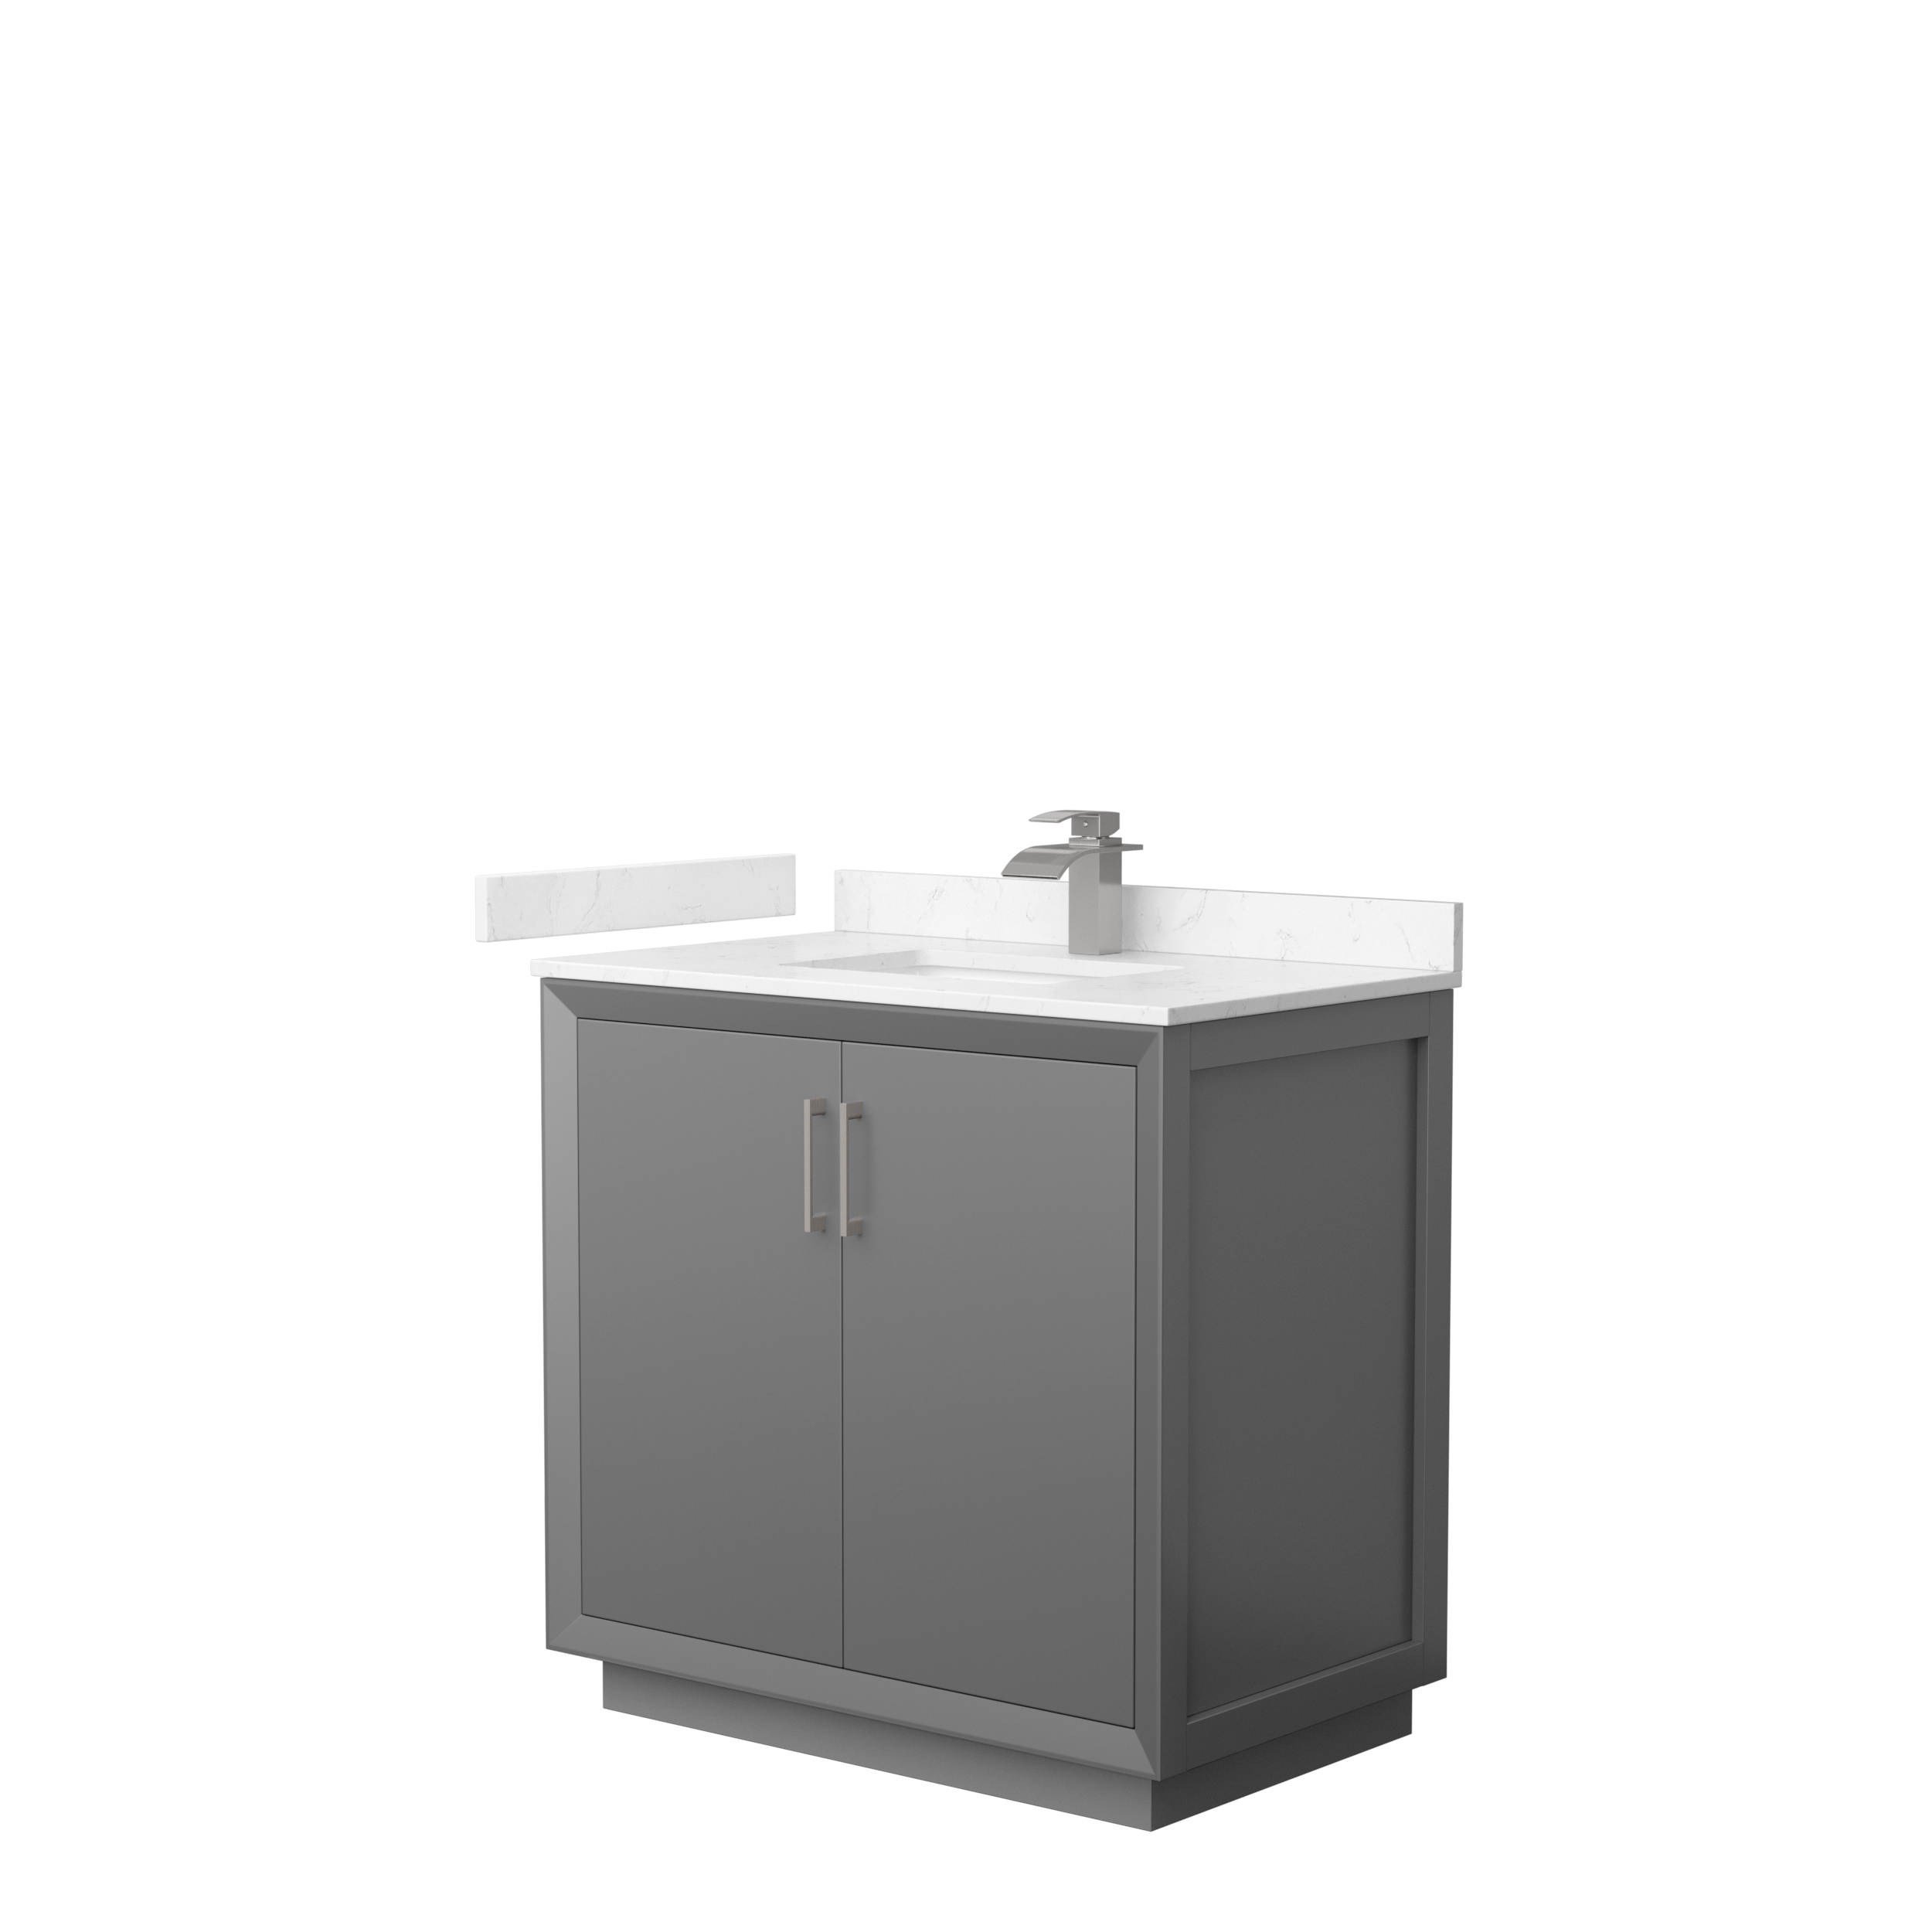 36" Single Bathroom Vanity with 3 Color Options, 3 Countertop Options, 3 Hardware Options and Mirror Options